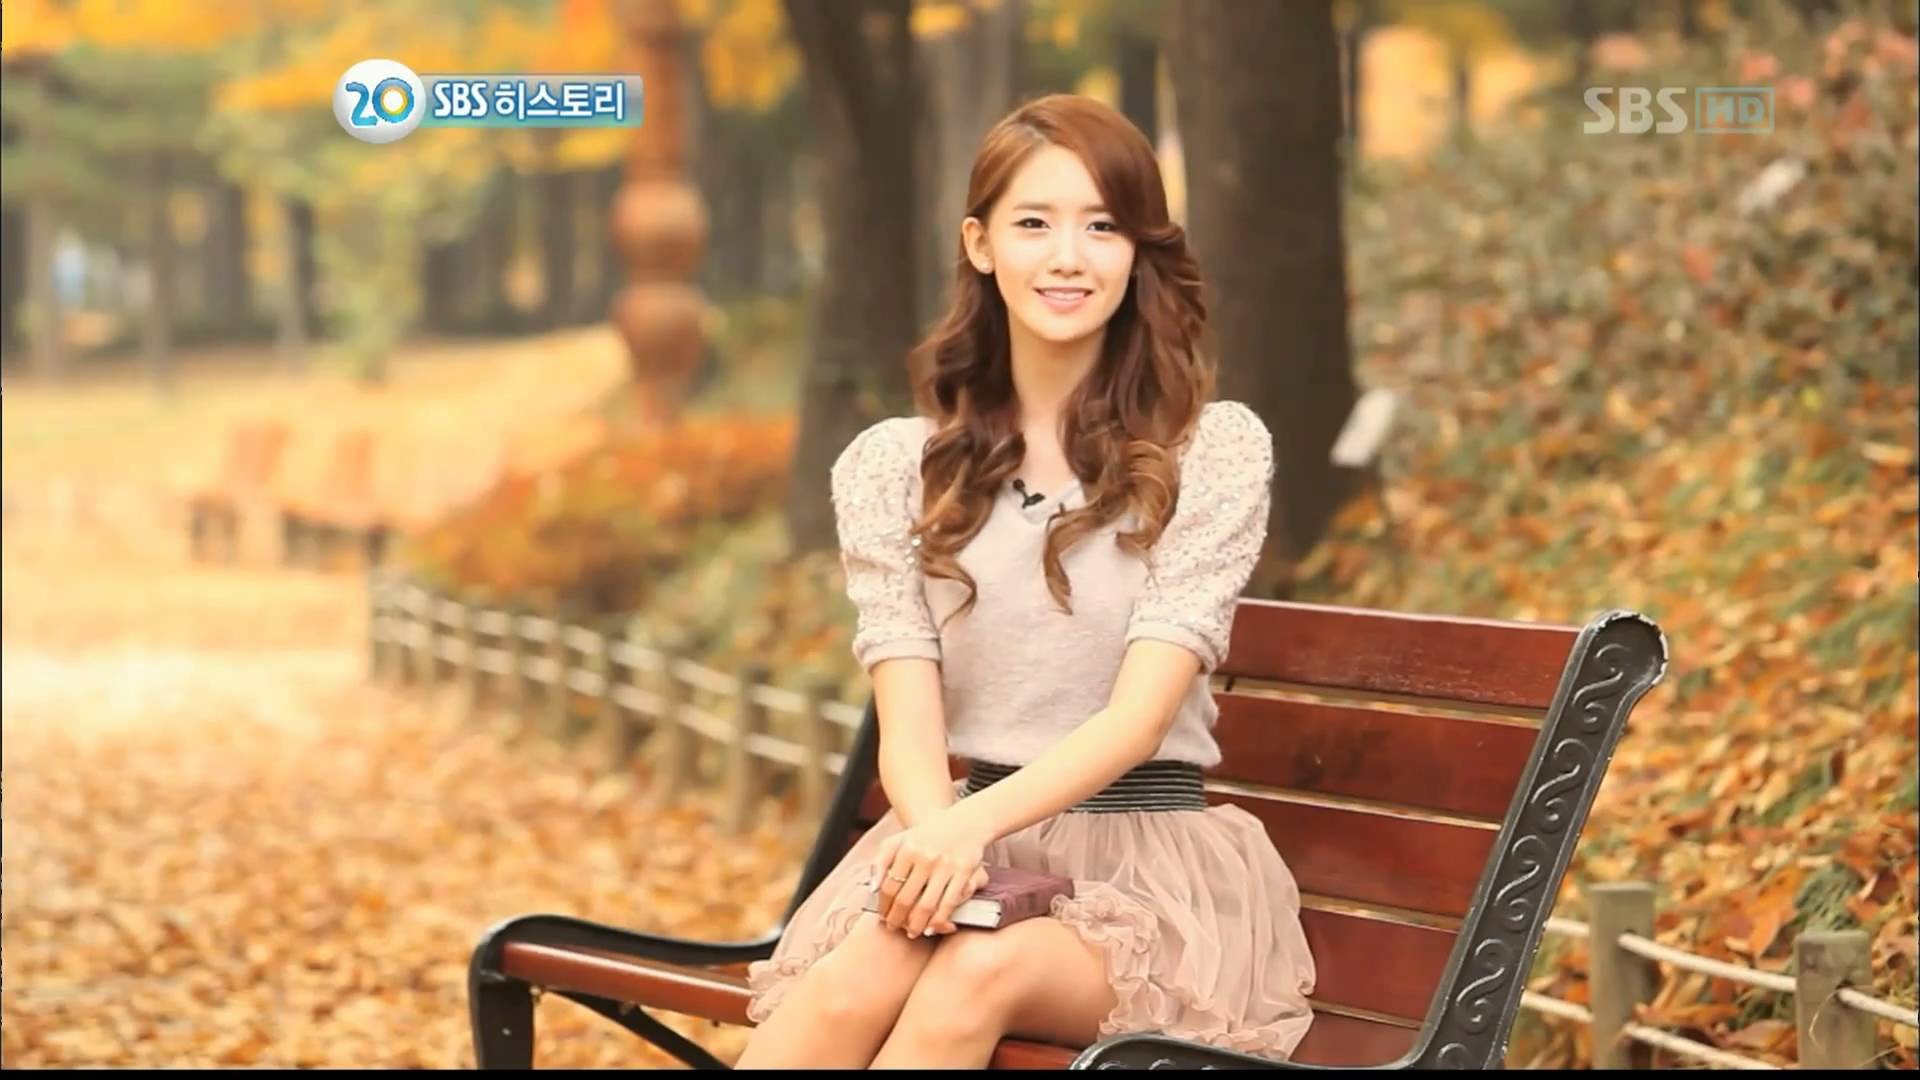 1920x1080 [101114] SNSD Yoona @ SBS 20th Anniversary Special Show[Full HD] - YouTube